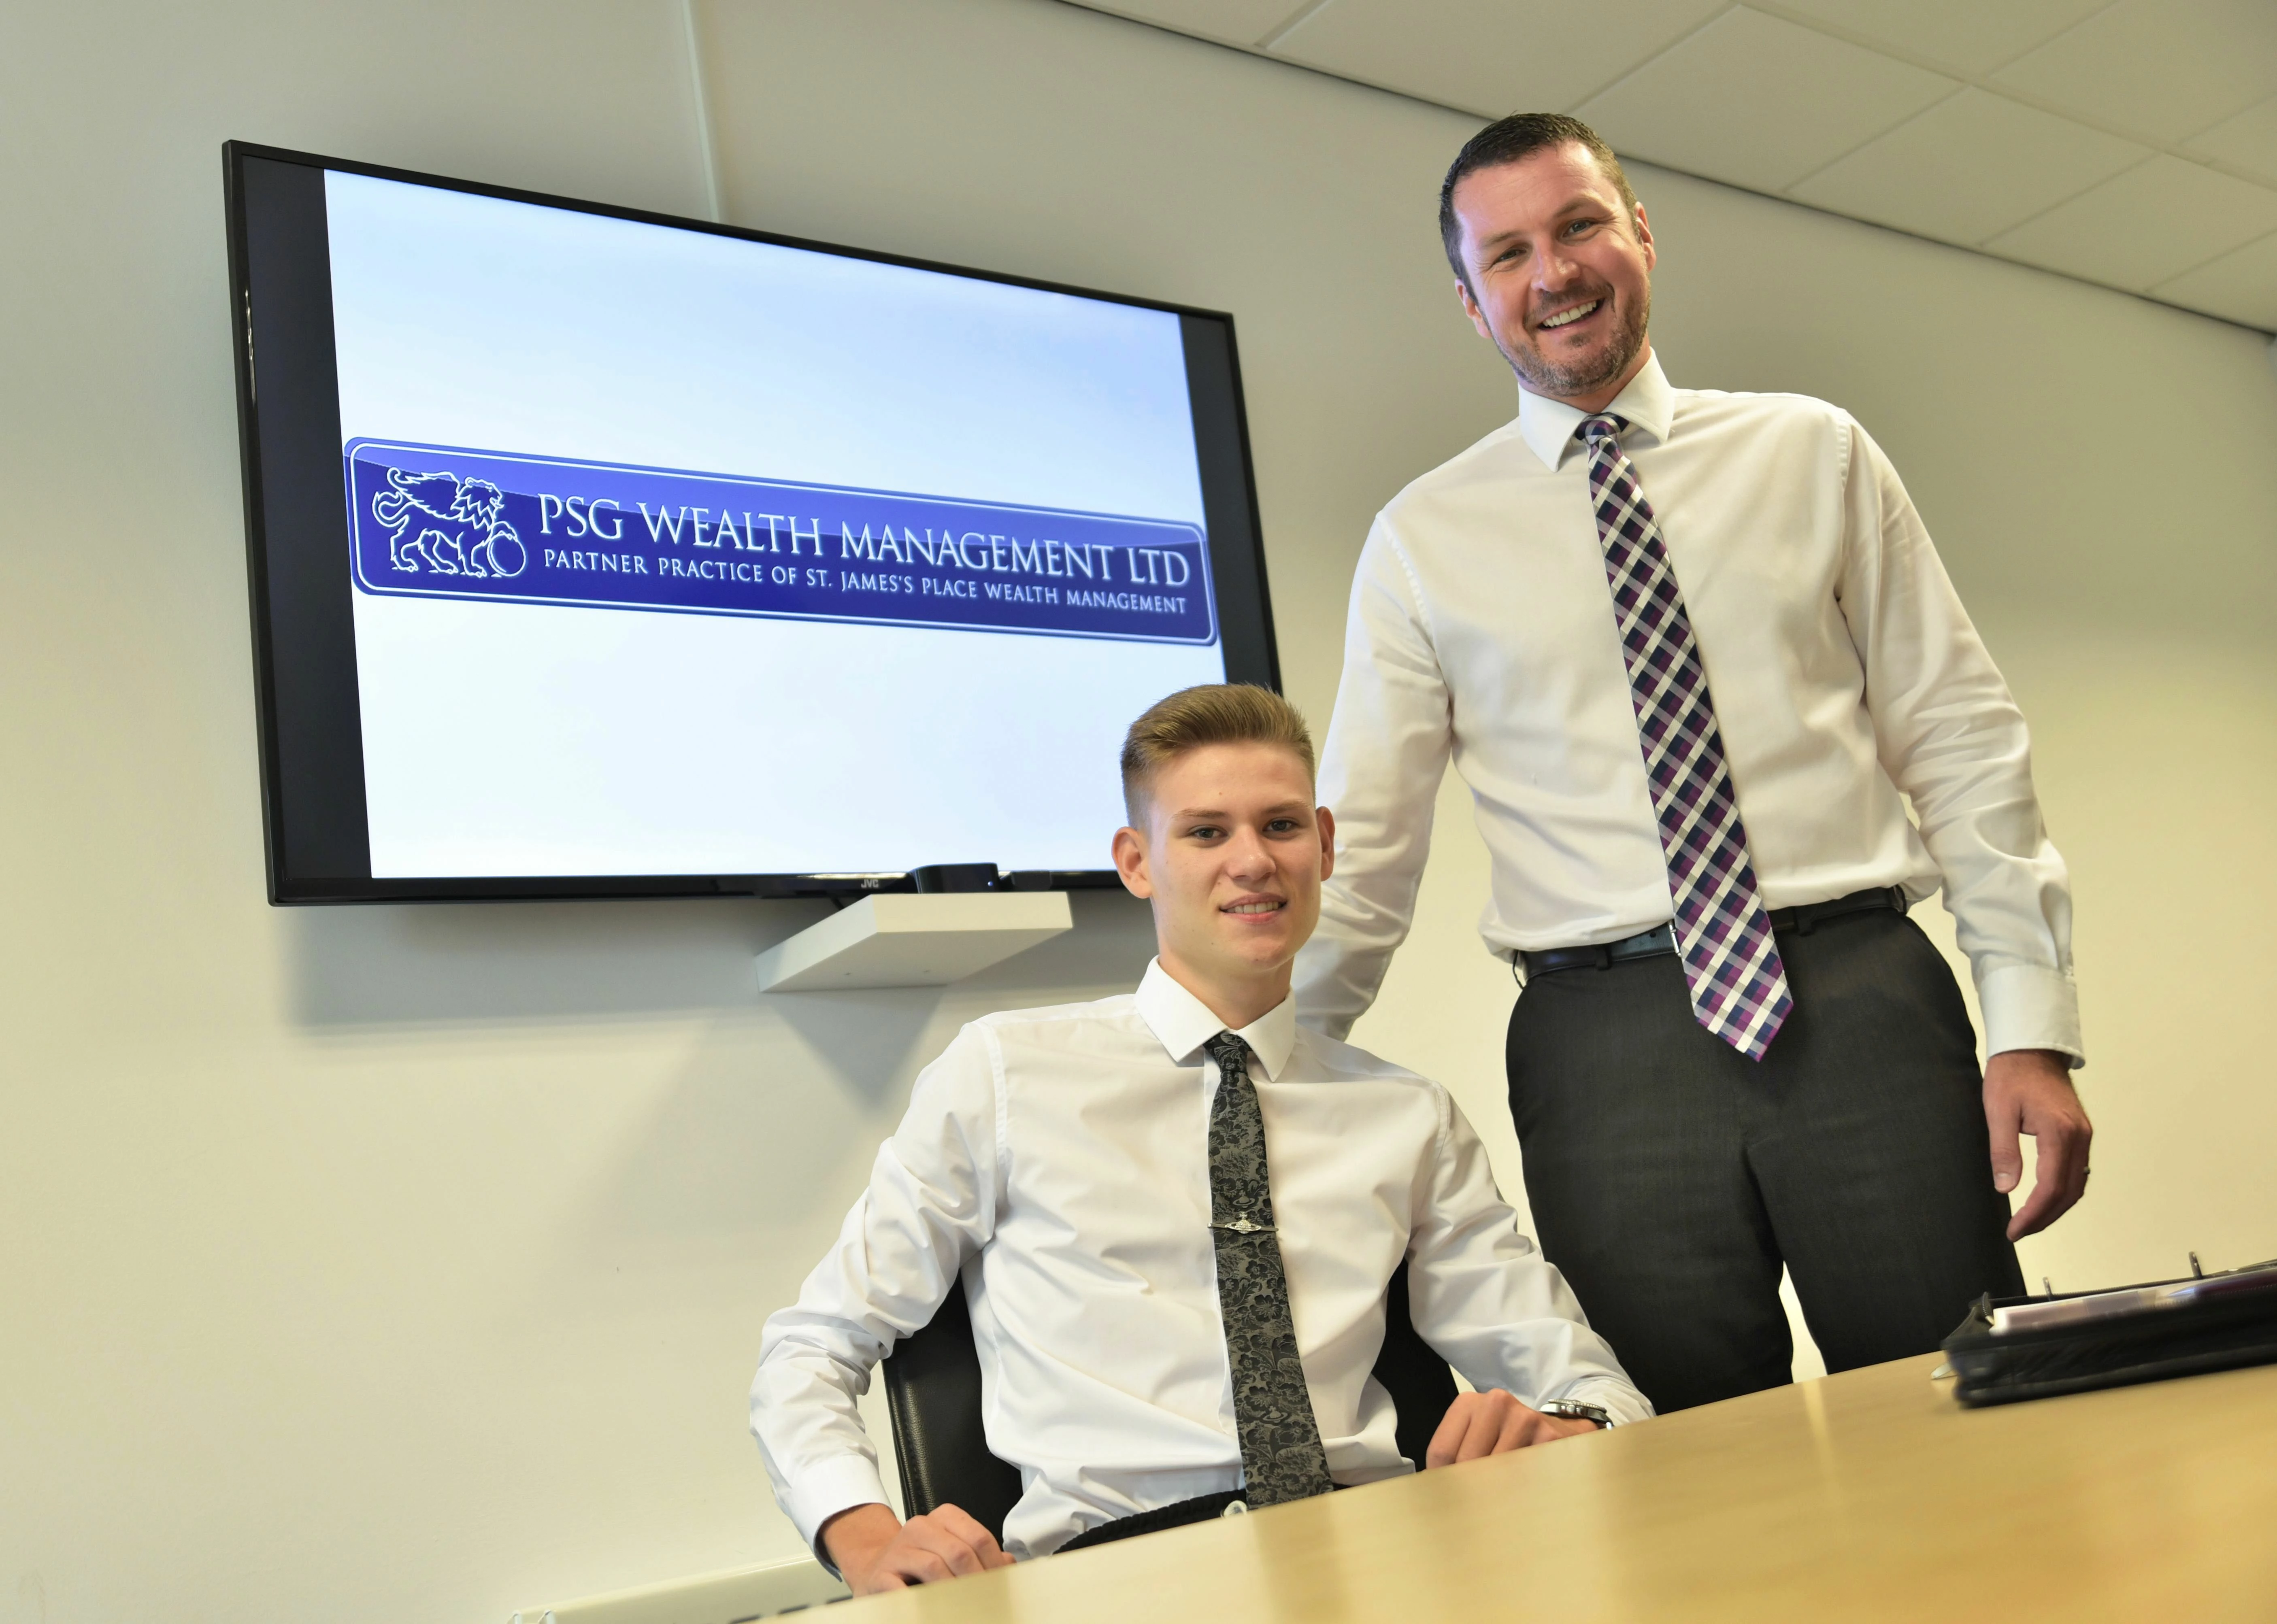 Paul welcomes Nile to the PSG Wealth Management team